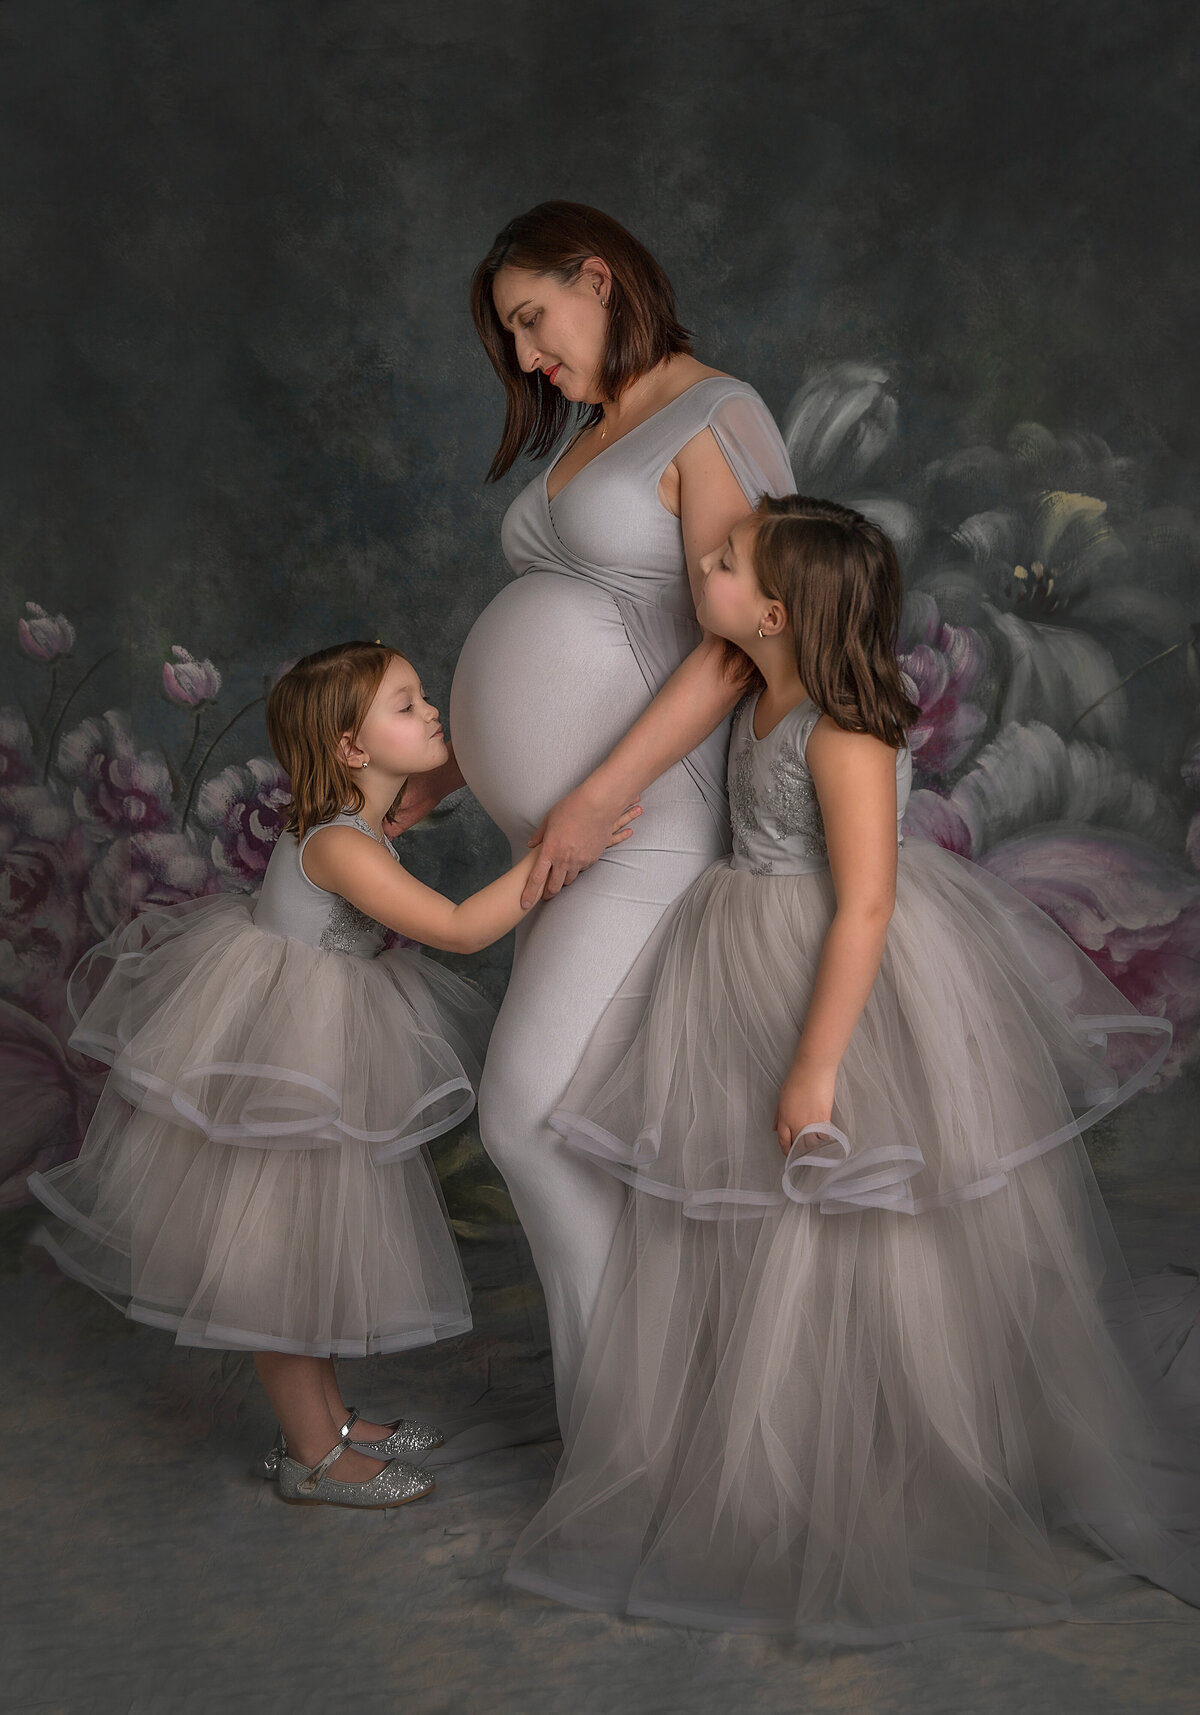 daughters looking up at their mother during a maternity session  in the studio / Sonia Gourlie Fine Art Photography / Ottawa Ontario